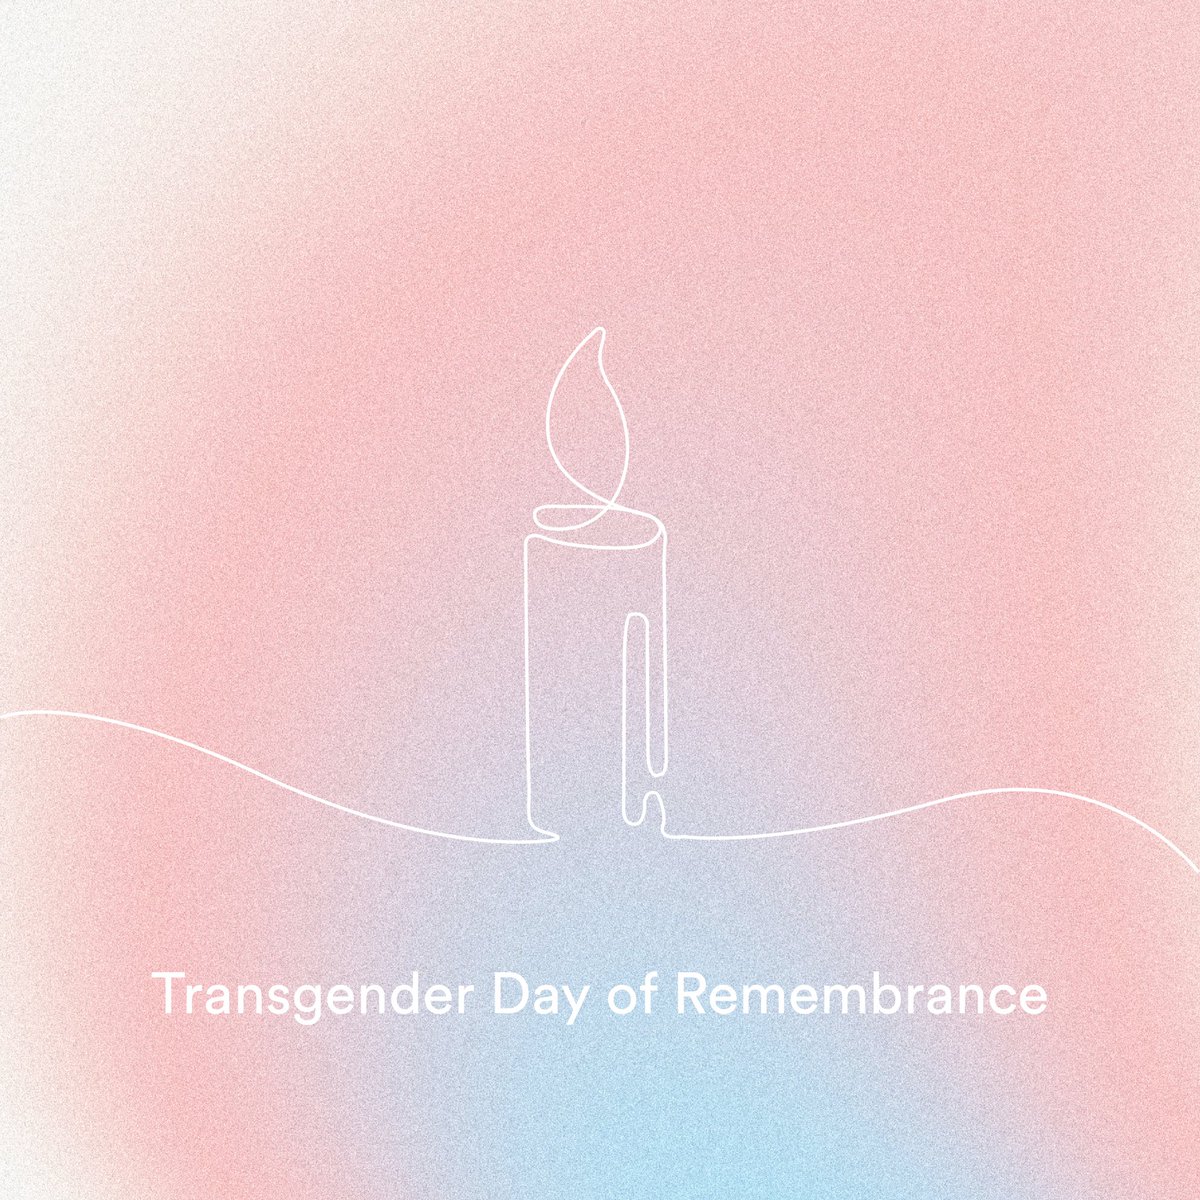 On Transgender Day of Remembrance, we remember the lives lost due to transphobia, bigotry and discrimination. We encourage every community member to honour these lives and memories, and to take the opportunity to reflect on the work that remains to be done. 🏳️‍⚧️🩷